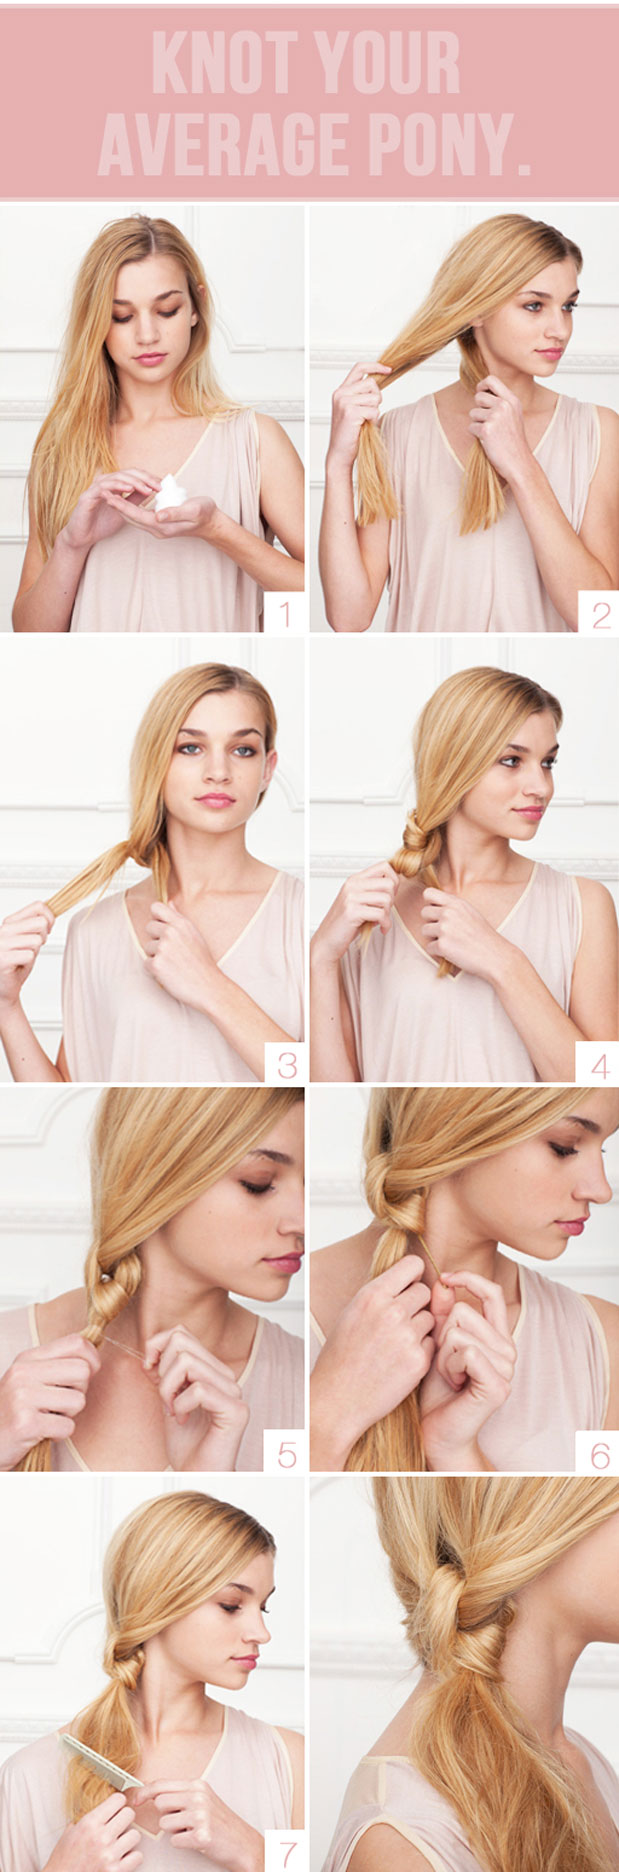 Knotted Pony - 15 Ways to Make Cute Ponytails